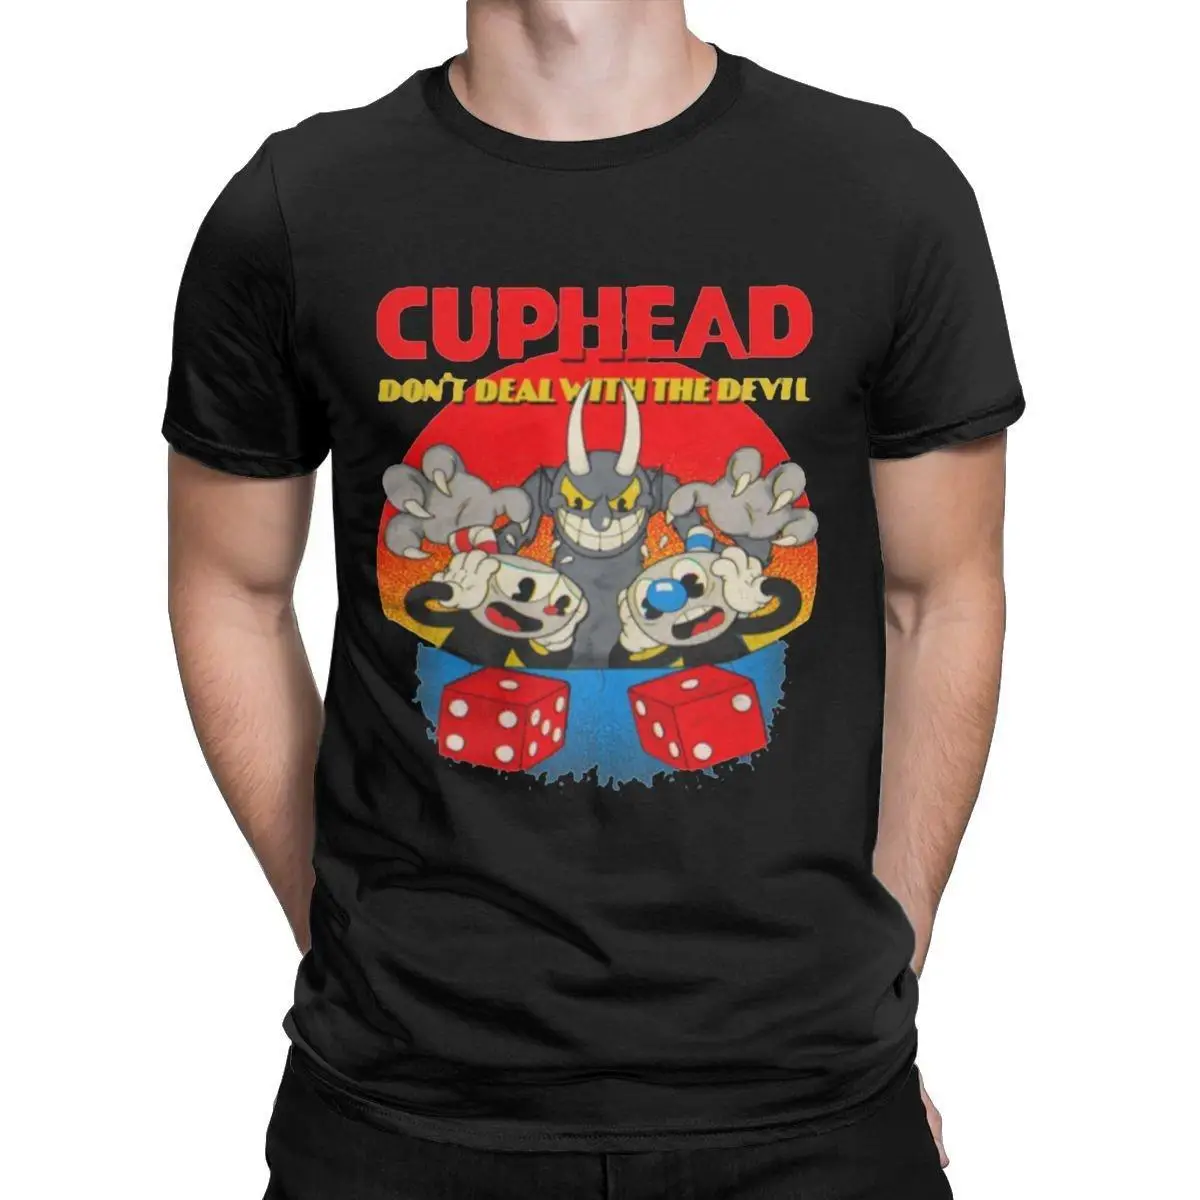 Men's Cuphead Mugman Don't Deal With The Devil T Shirts Cotton Clothes Funny Short Sleeve Crewneck Tee Shirt Summer T-Shirt